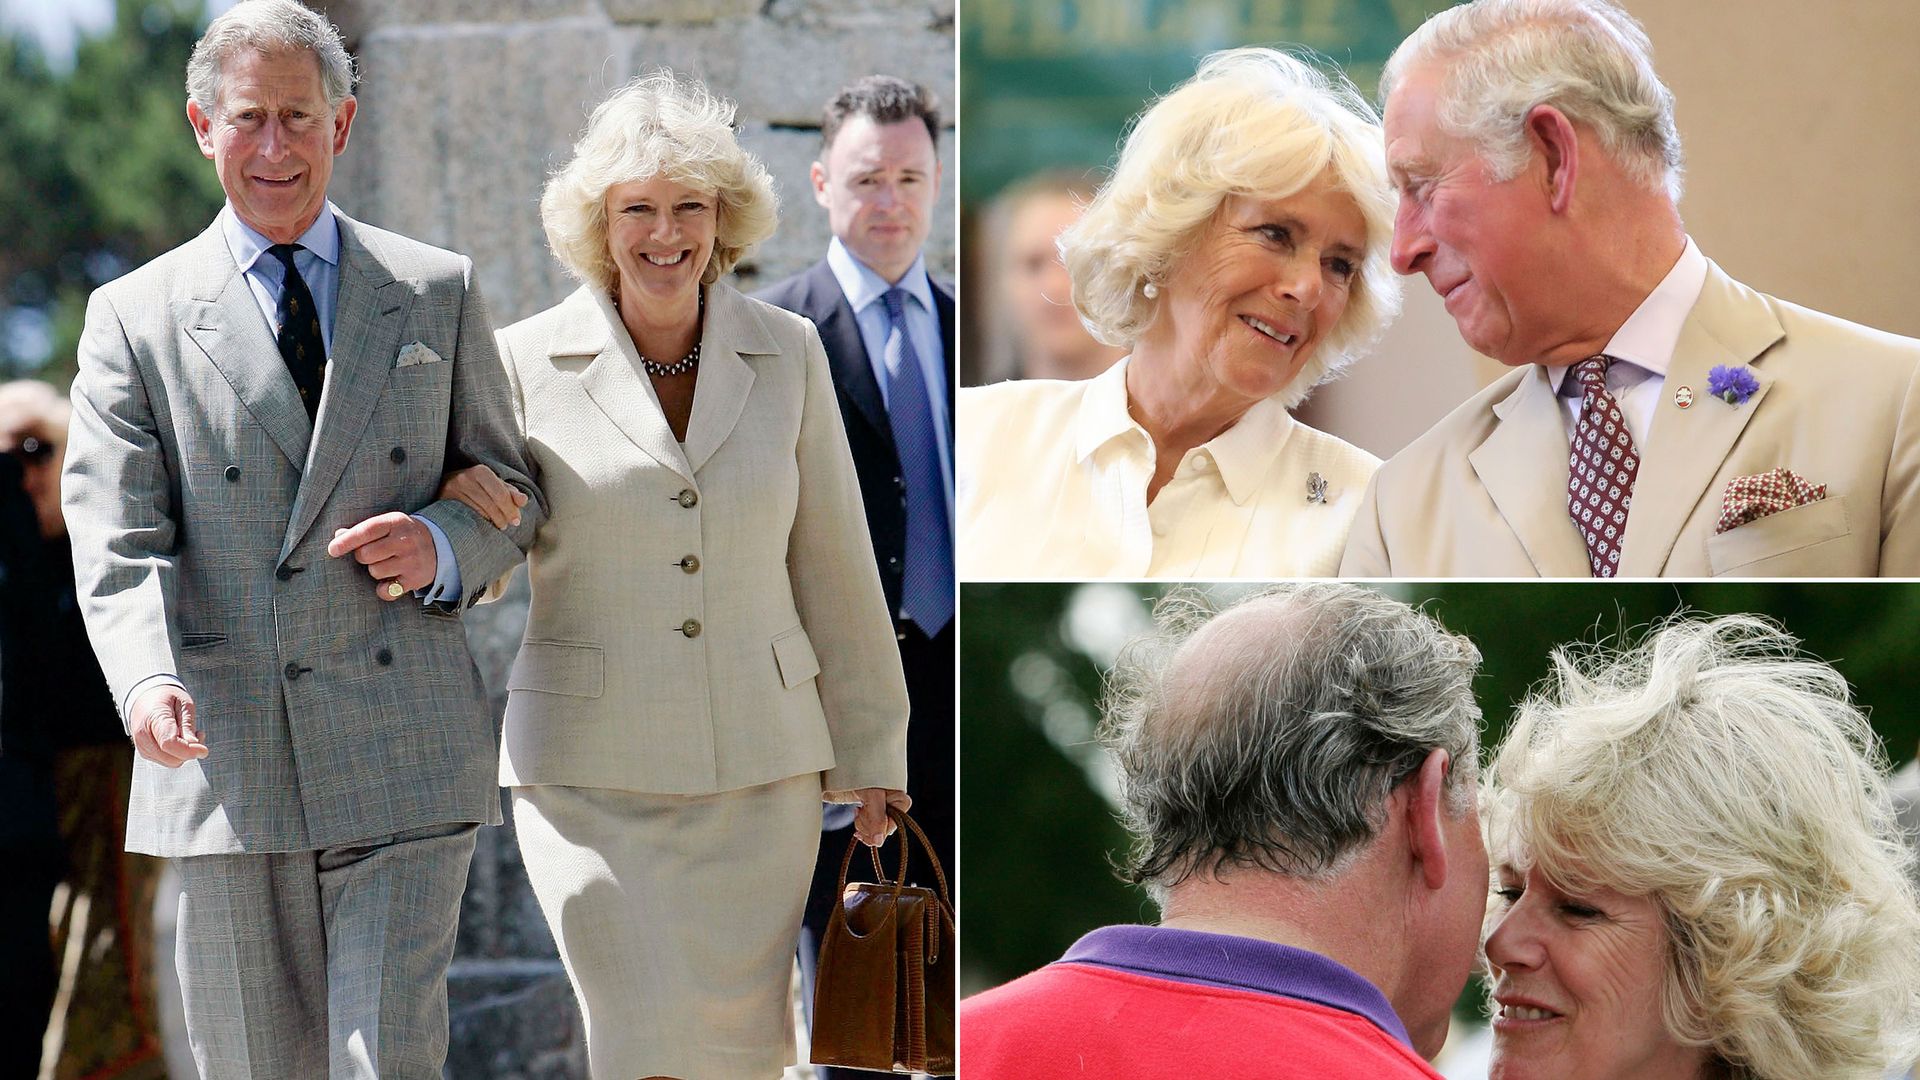 King Charles and Queen Camilla's most loved-up moments in 14 sweet photos